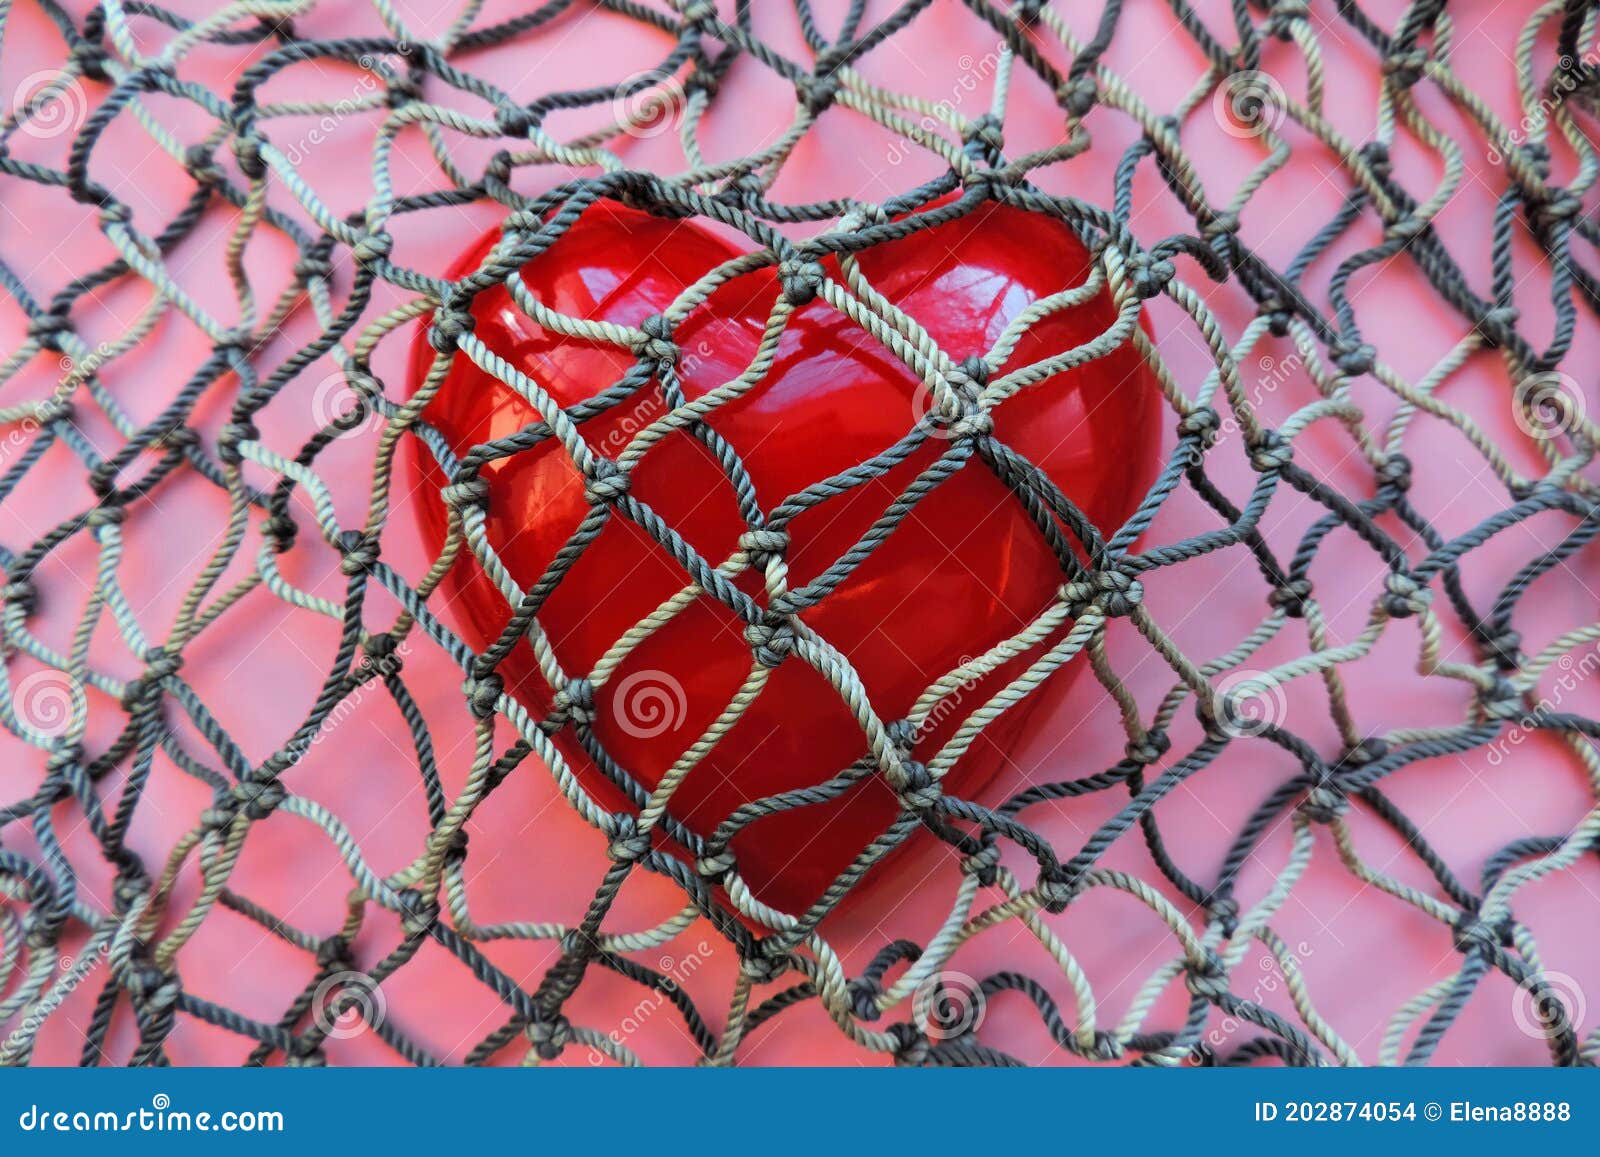 Red Heart Covered with Mesh. Concept of Rejection of Love, Prohibition of  Free Expression of Emotions, Concept of Constraint , Stock Photo - Image of  expression, rope: 202874054